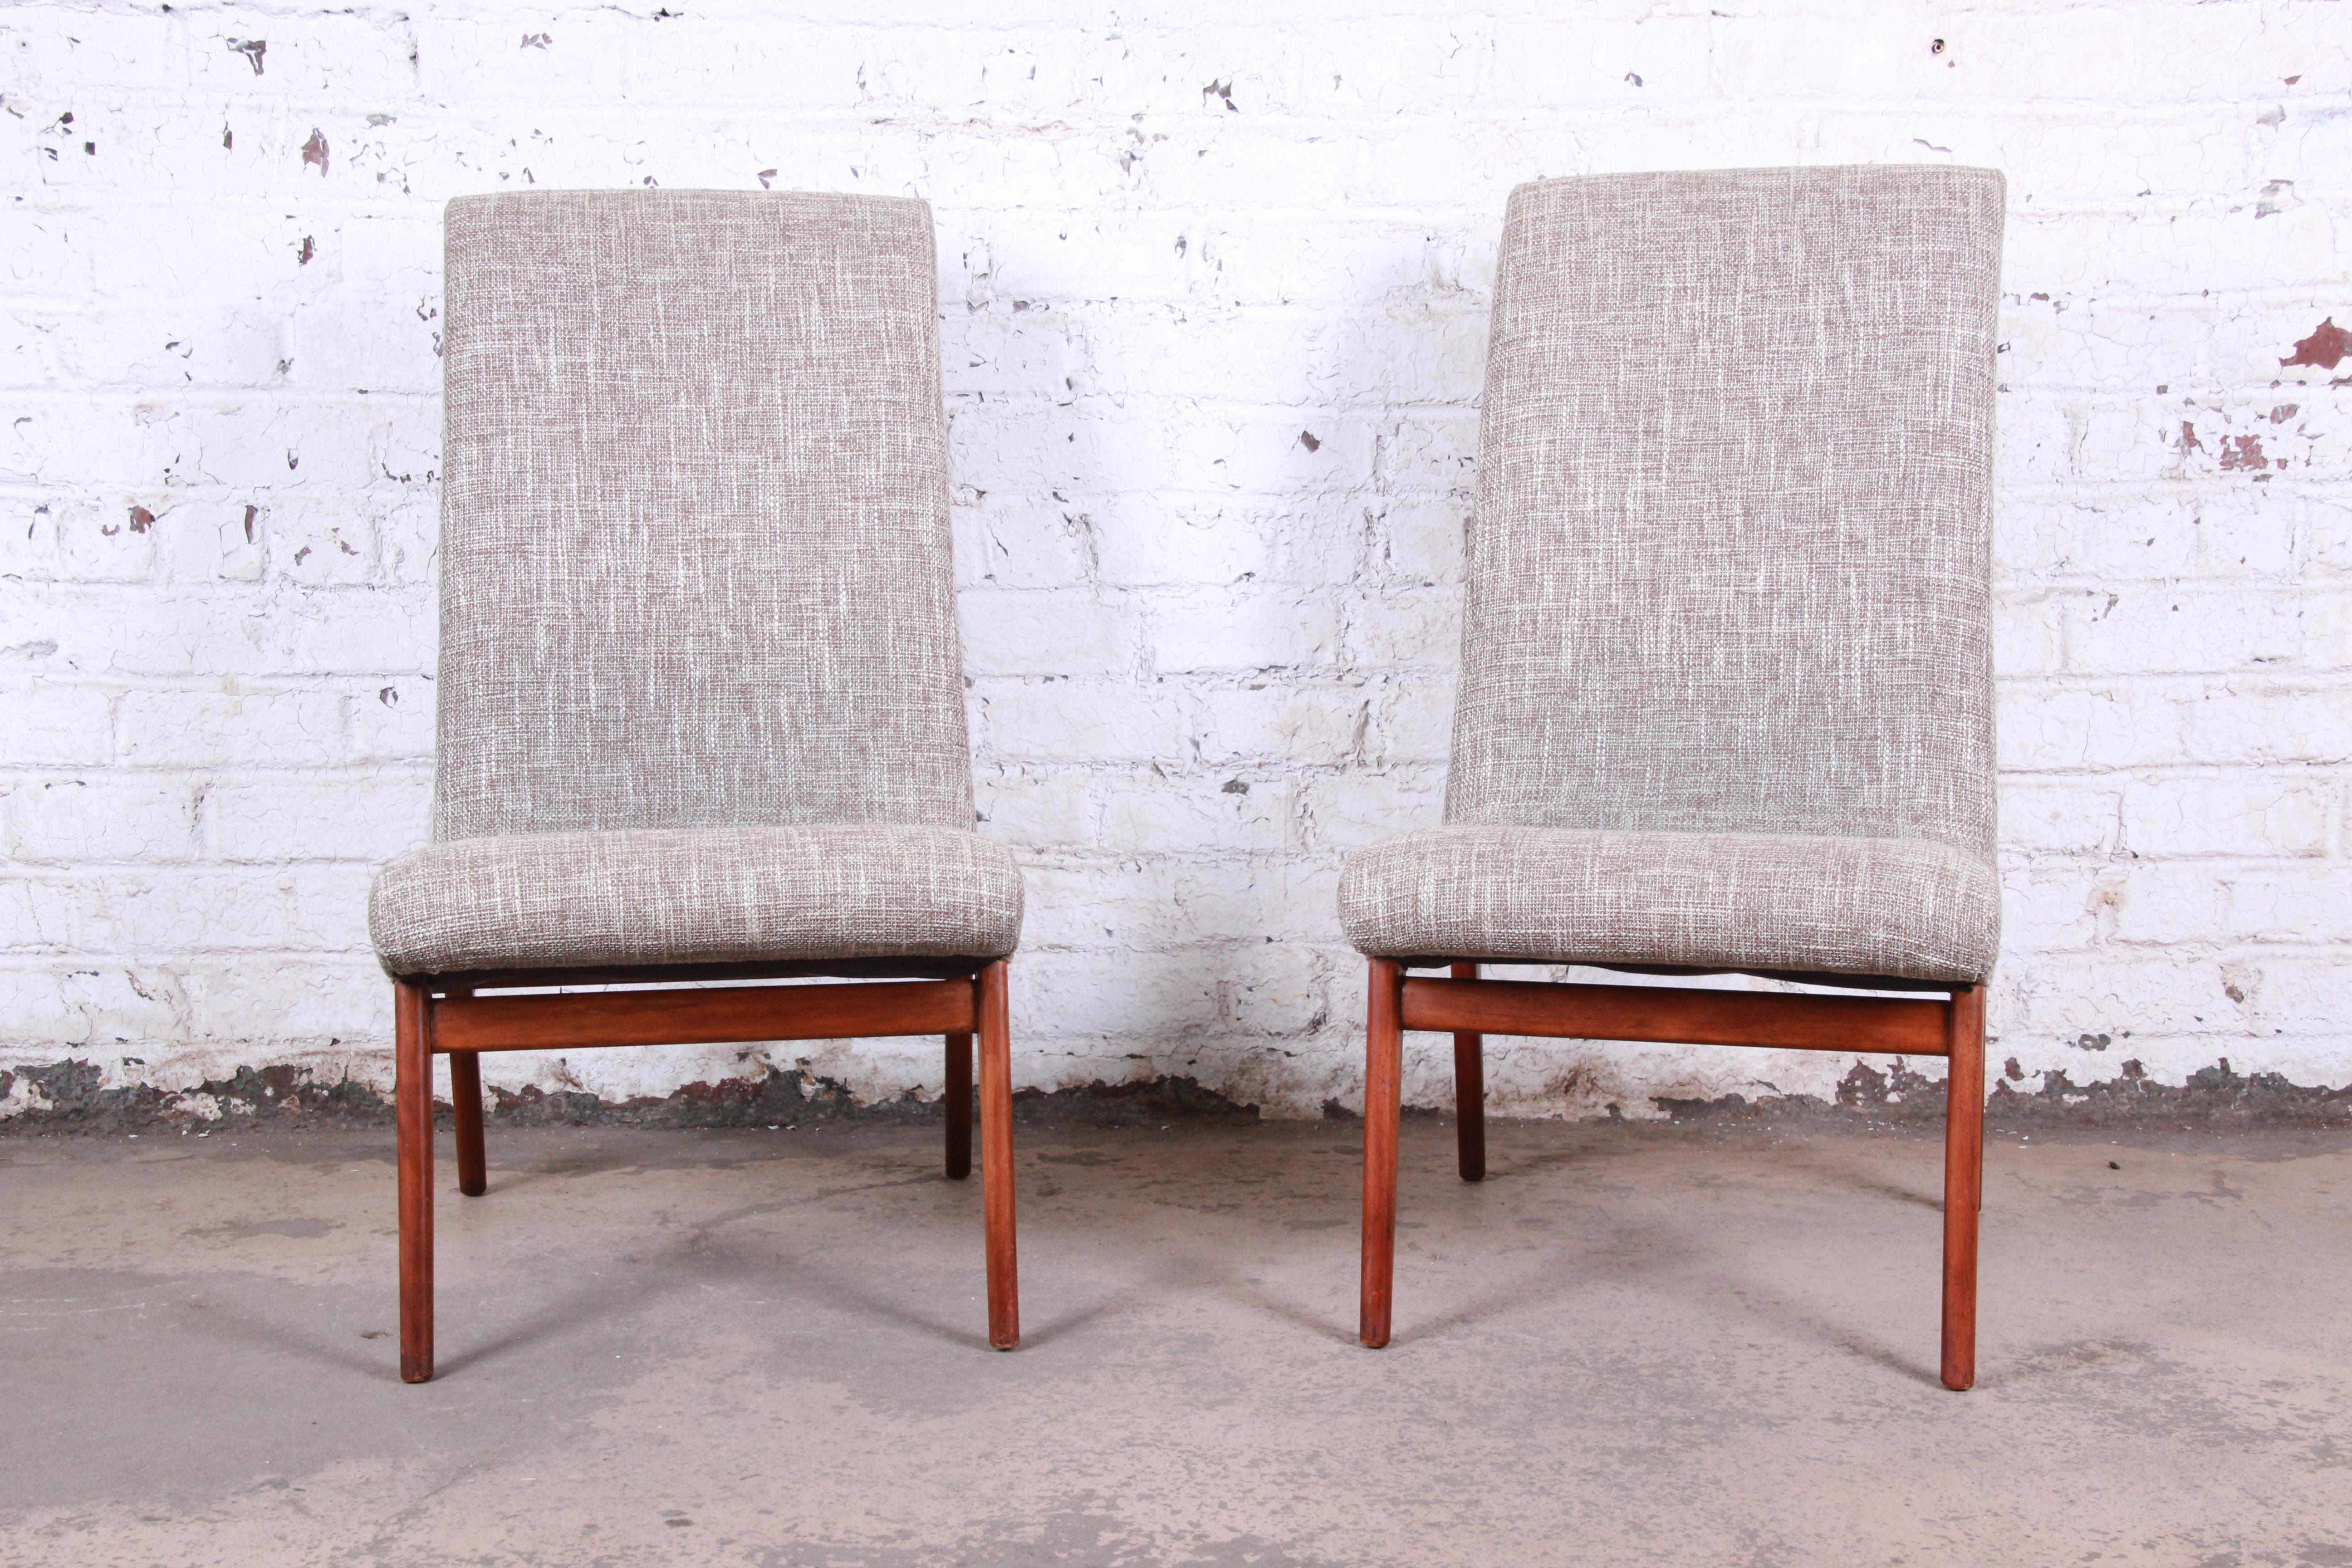 An exceptional pair of mid-century modern slipper chairs by famed American industrial designer Norman Bel Geddes for Valley Furniture, circa 1940s. The chairs have been newly reupholstered in gorgeous Knoll fabric in cream and tan. They have